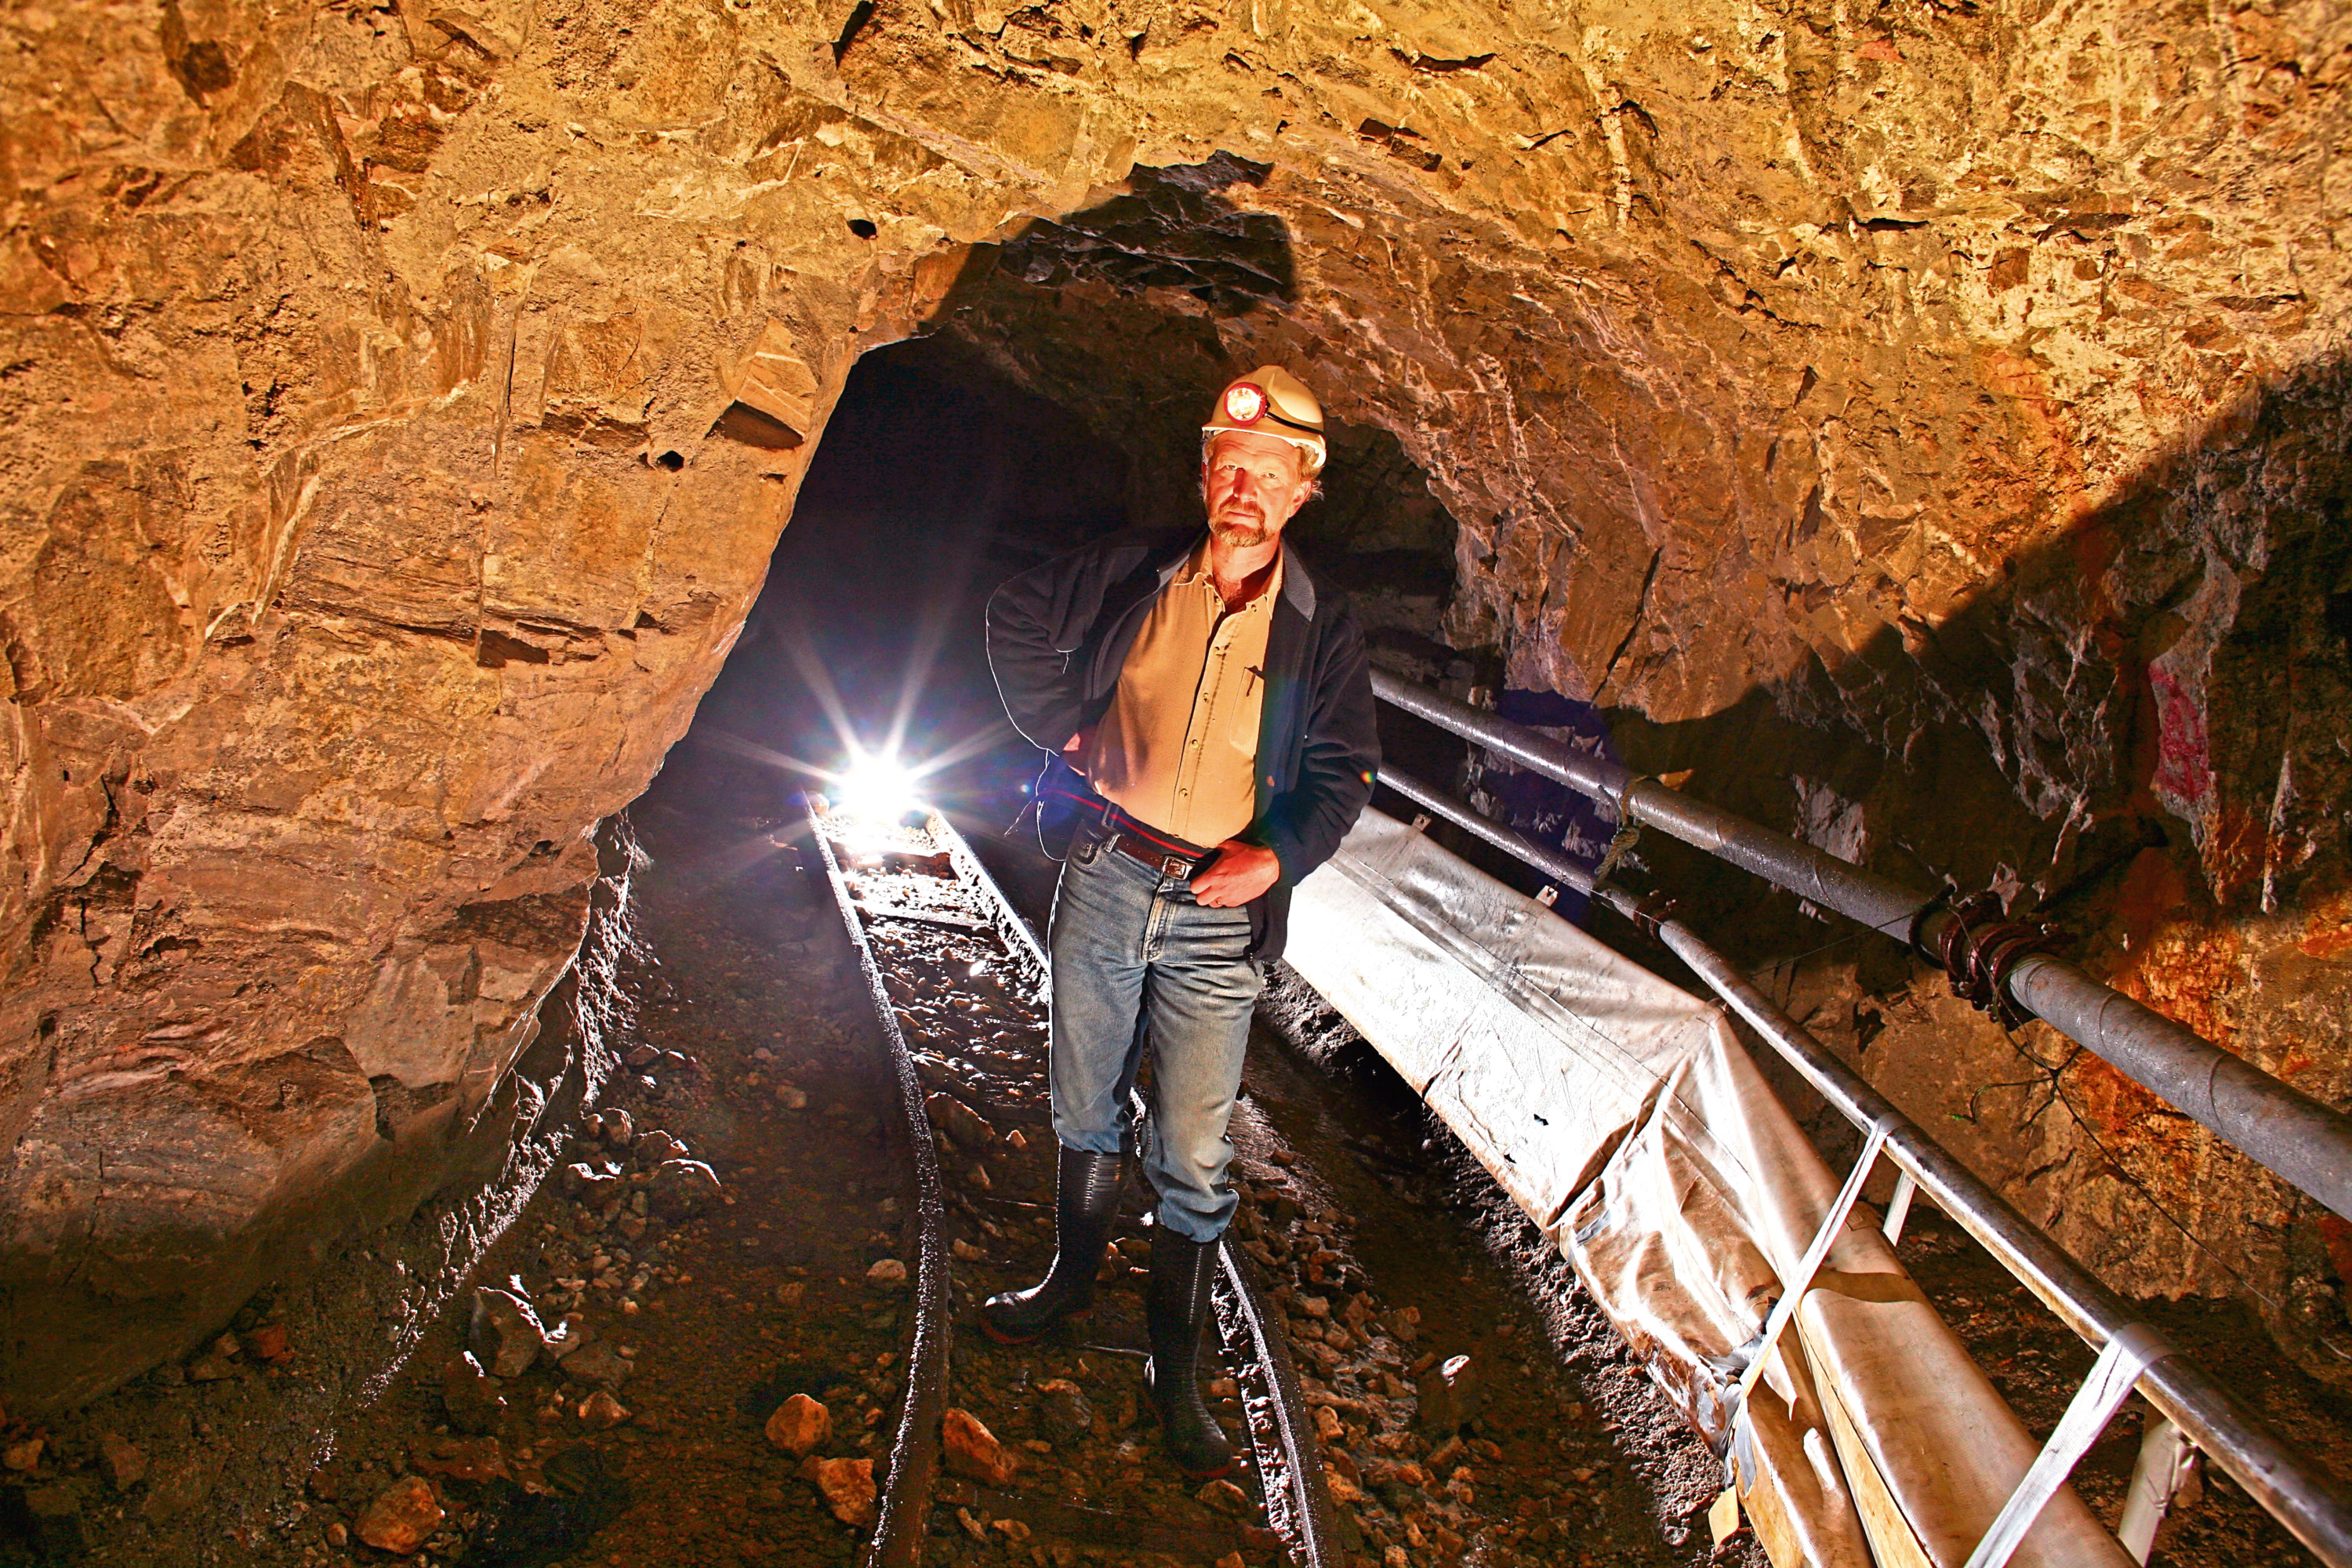 Biz Chris Sangster
CRIANLARICH, UNITED KINGDOM - JULY 22:  Chris Sangster, chief executive of Scotgold inspects the Tyndrum gold mine on July 22, 2008 in Tyndrum Scotland. The company is eagerly awaiting planning permission to start extracting an estimated 70 million GBP worth of gold from the hills. With the current weakness in the economy, combined with fears of inflation pushing the price of gold to record heights, it makes potential mining in Scotland economically viable.   (Photo by Jeff J Mitchell/Getty Images)